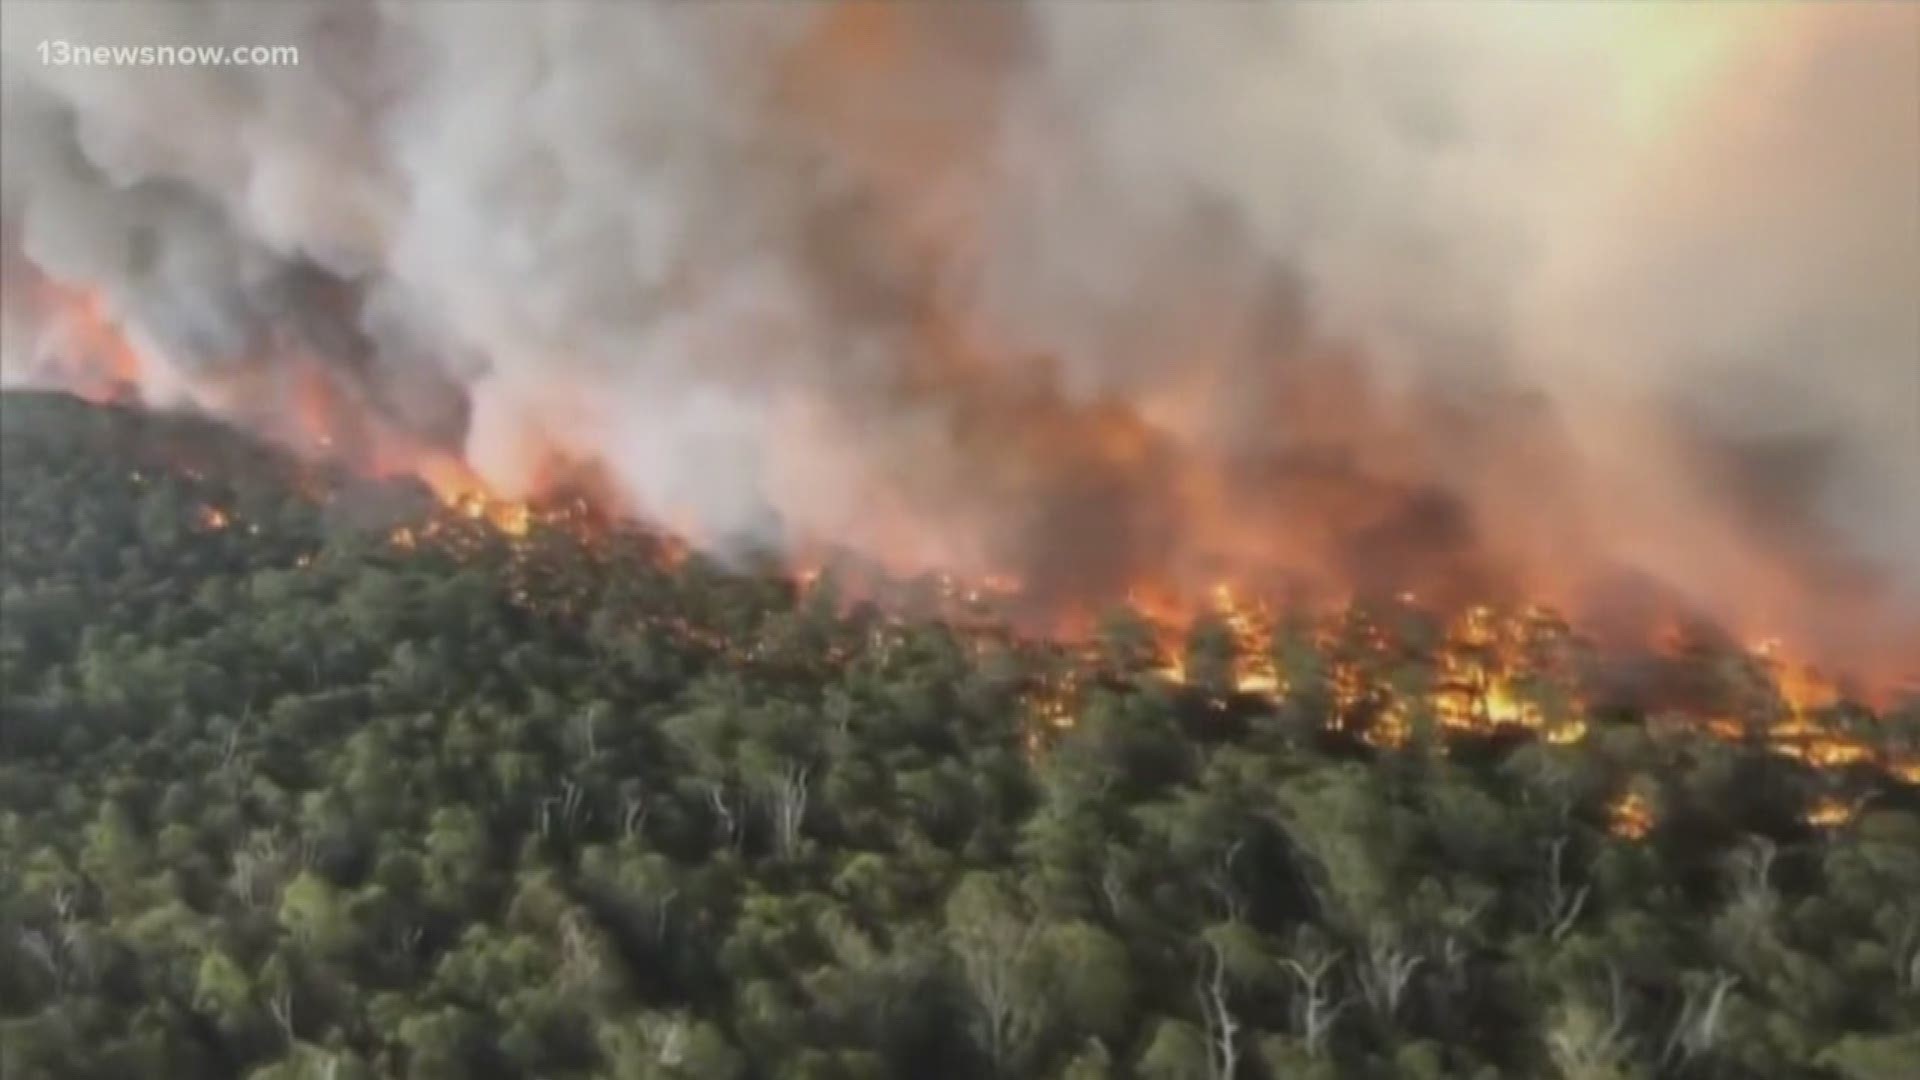 Brushfires continue to burn in Australia. Here's a breakdown of how you can help from home.